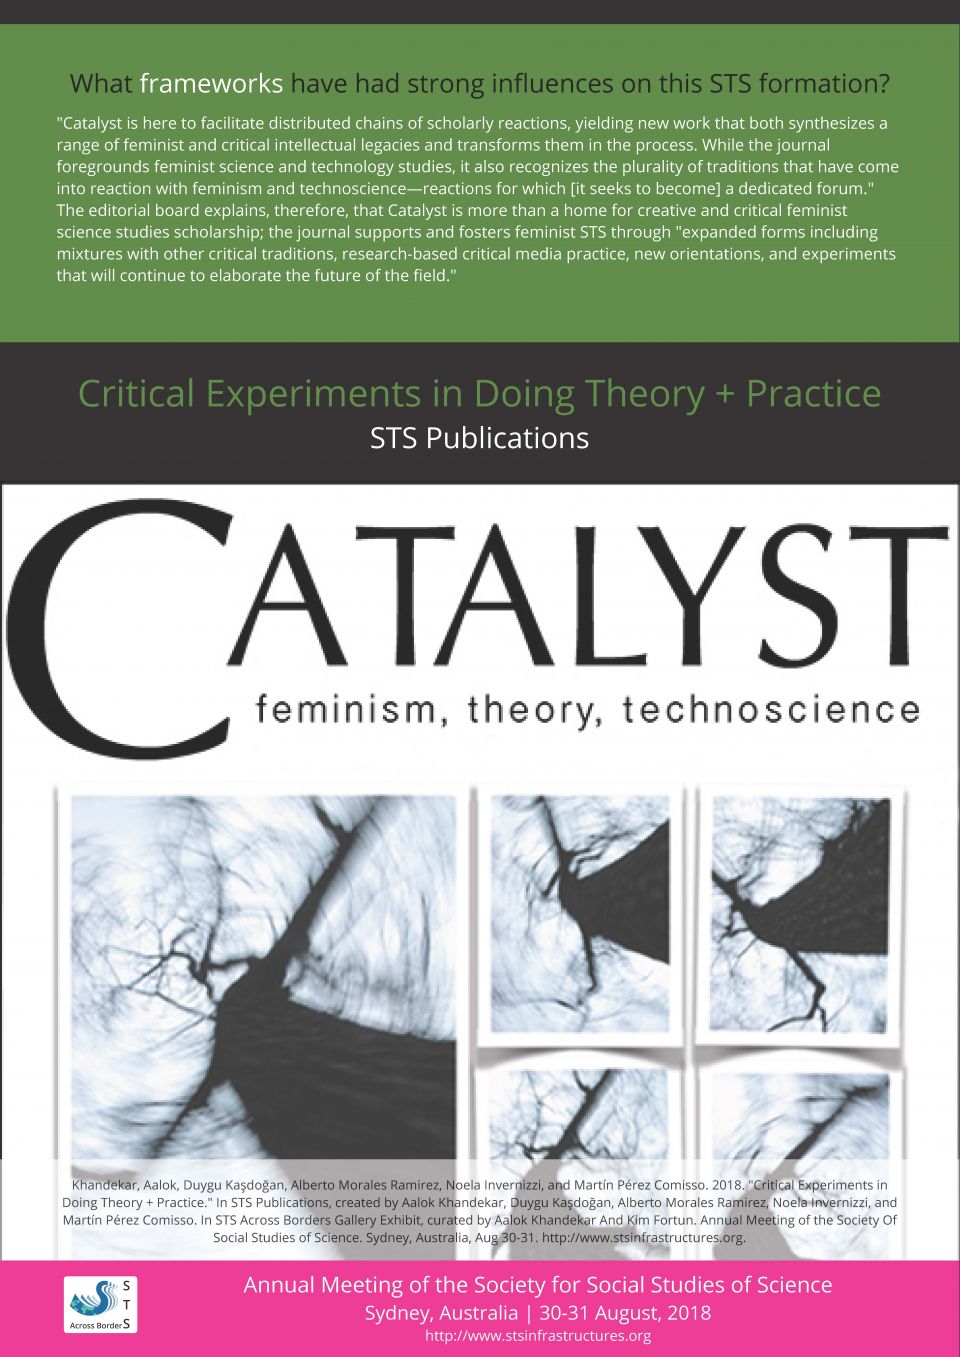 Critical Experiments in Doing Theory + Practice